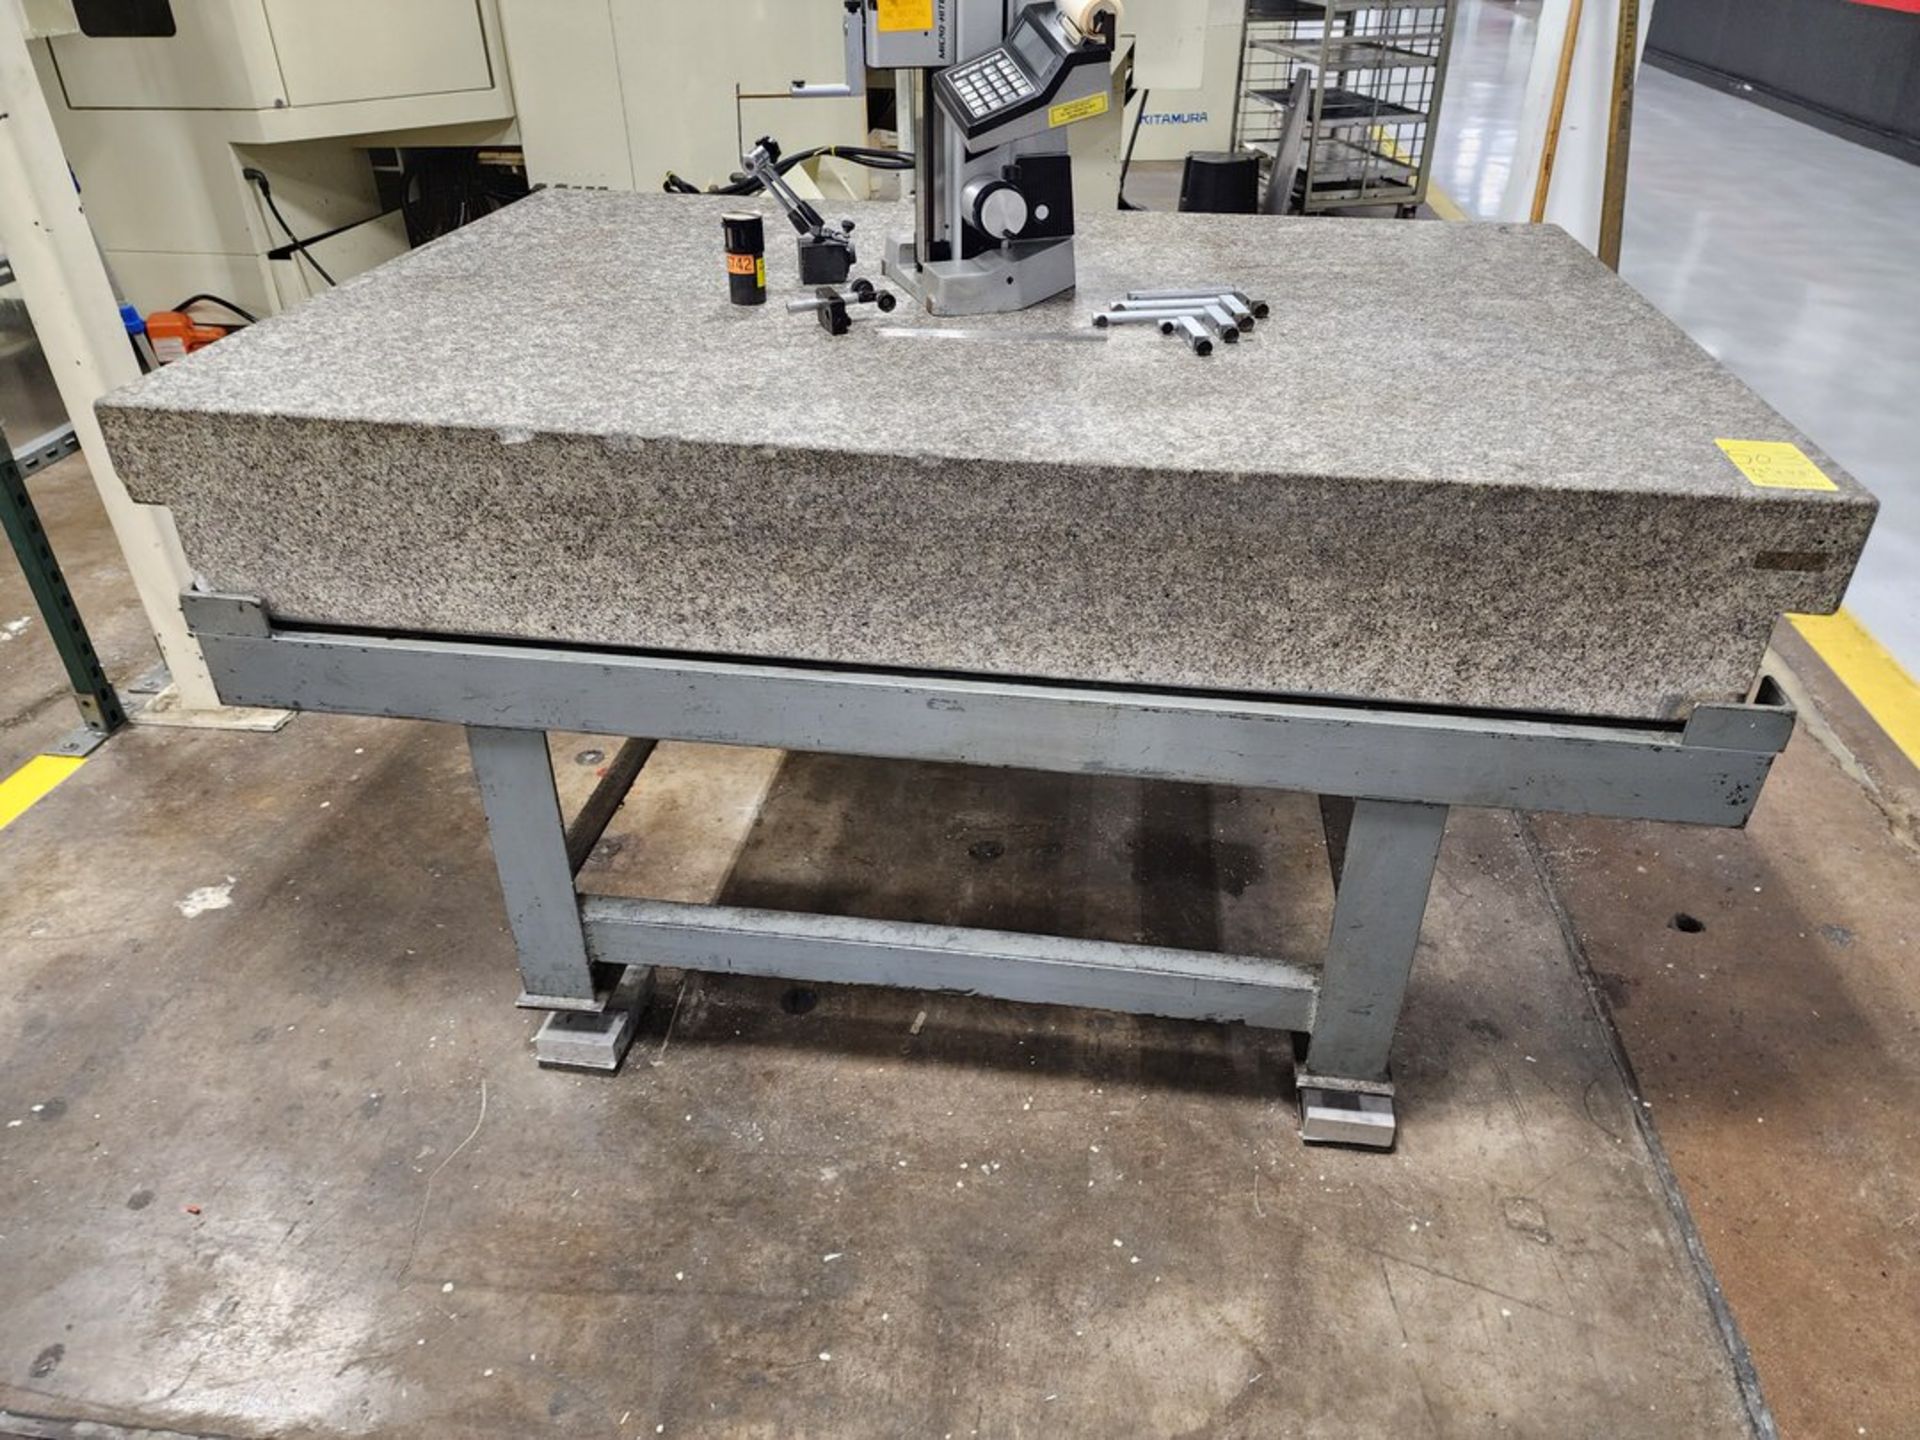 Surface Granite Plate W/ Stand 72"x48"